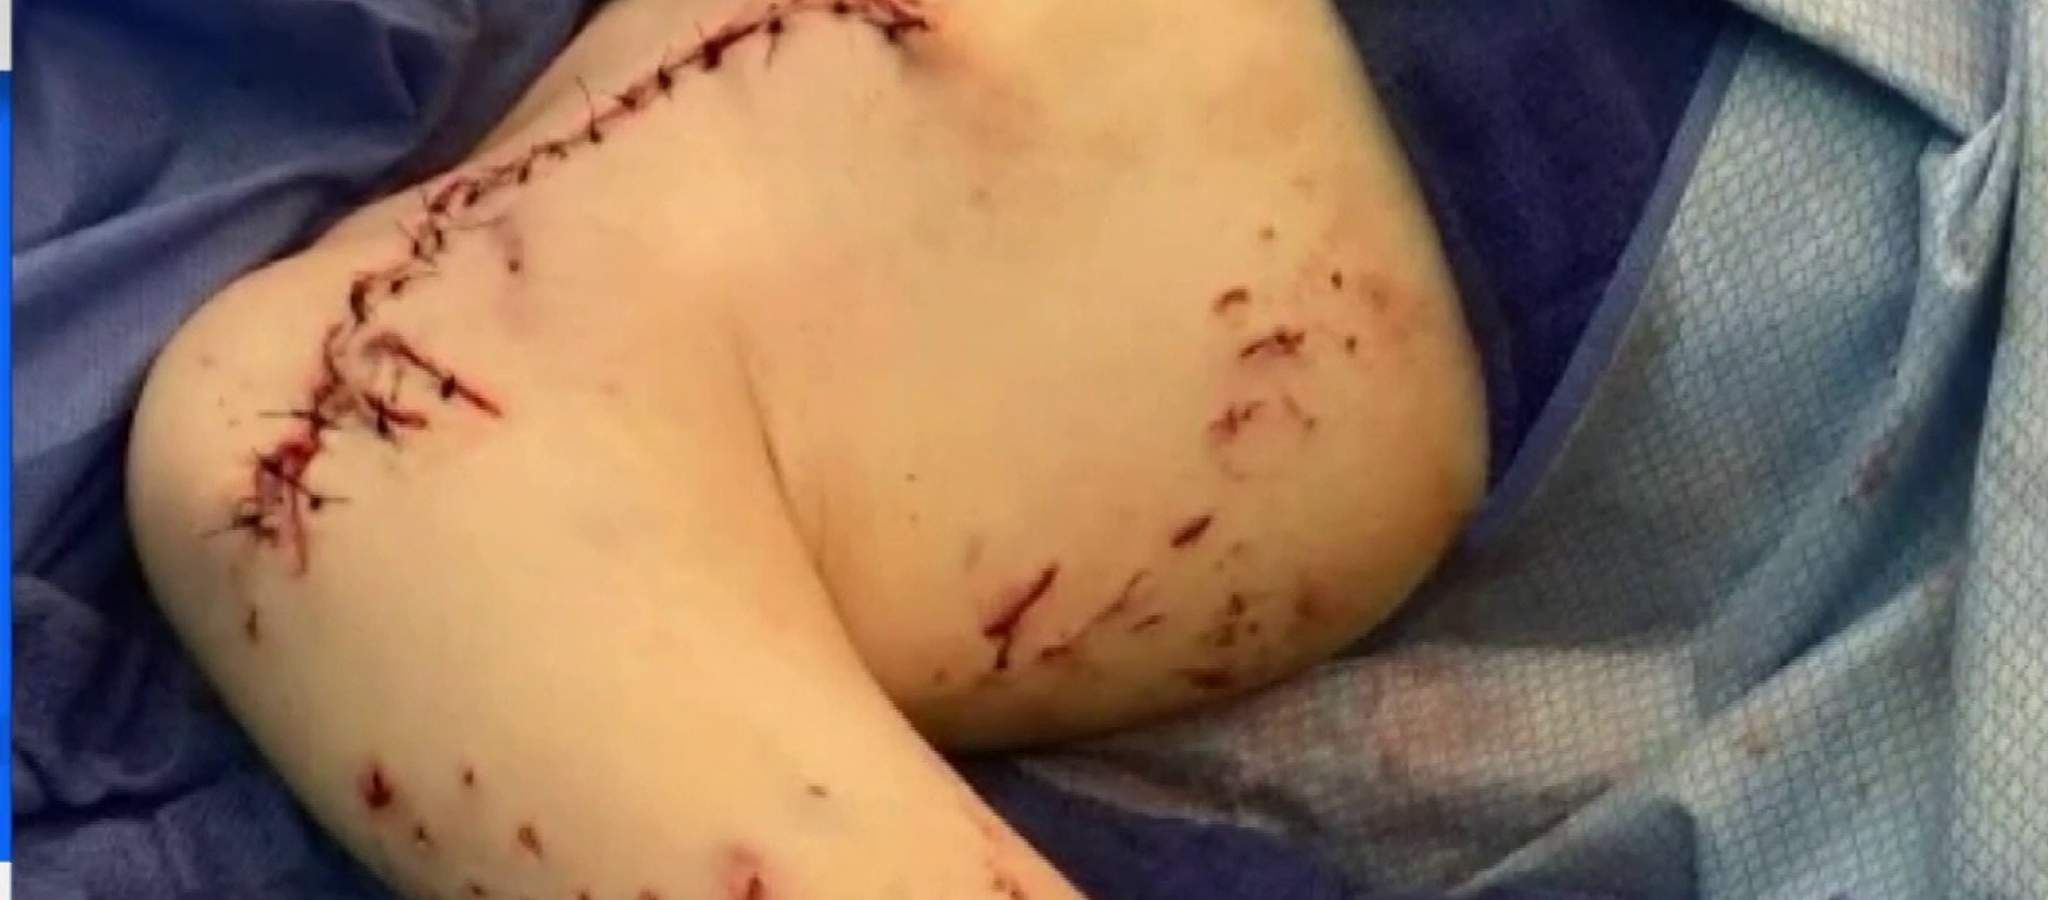 ‘A shark tried to eat me:’ 9-year-old boy recovering after bite at Florida beach